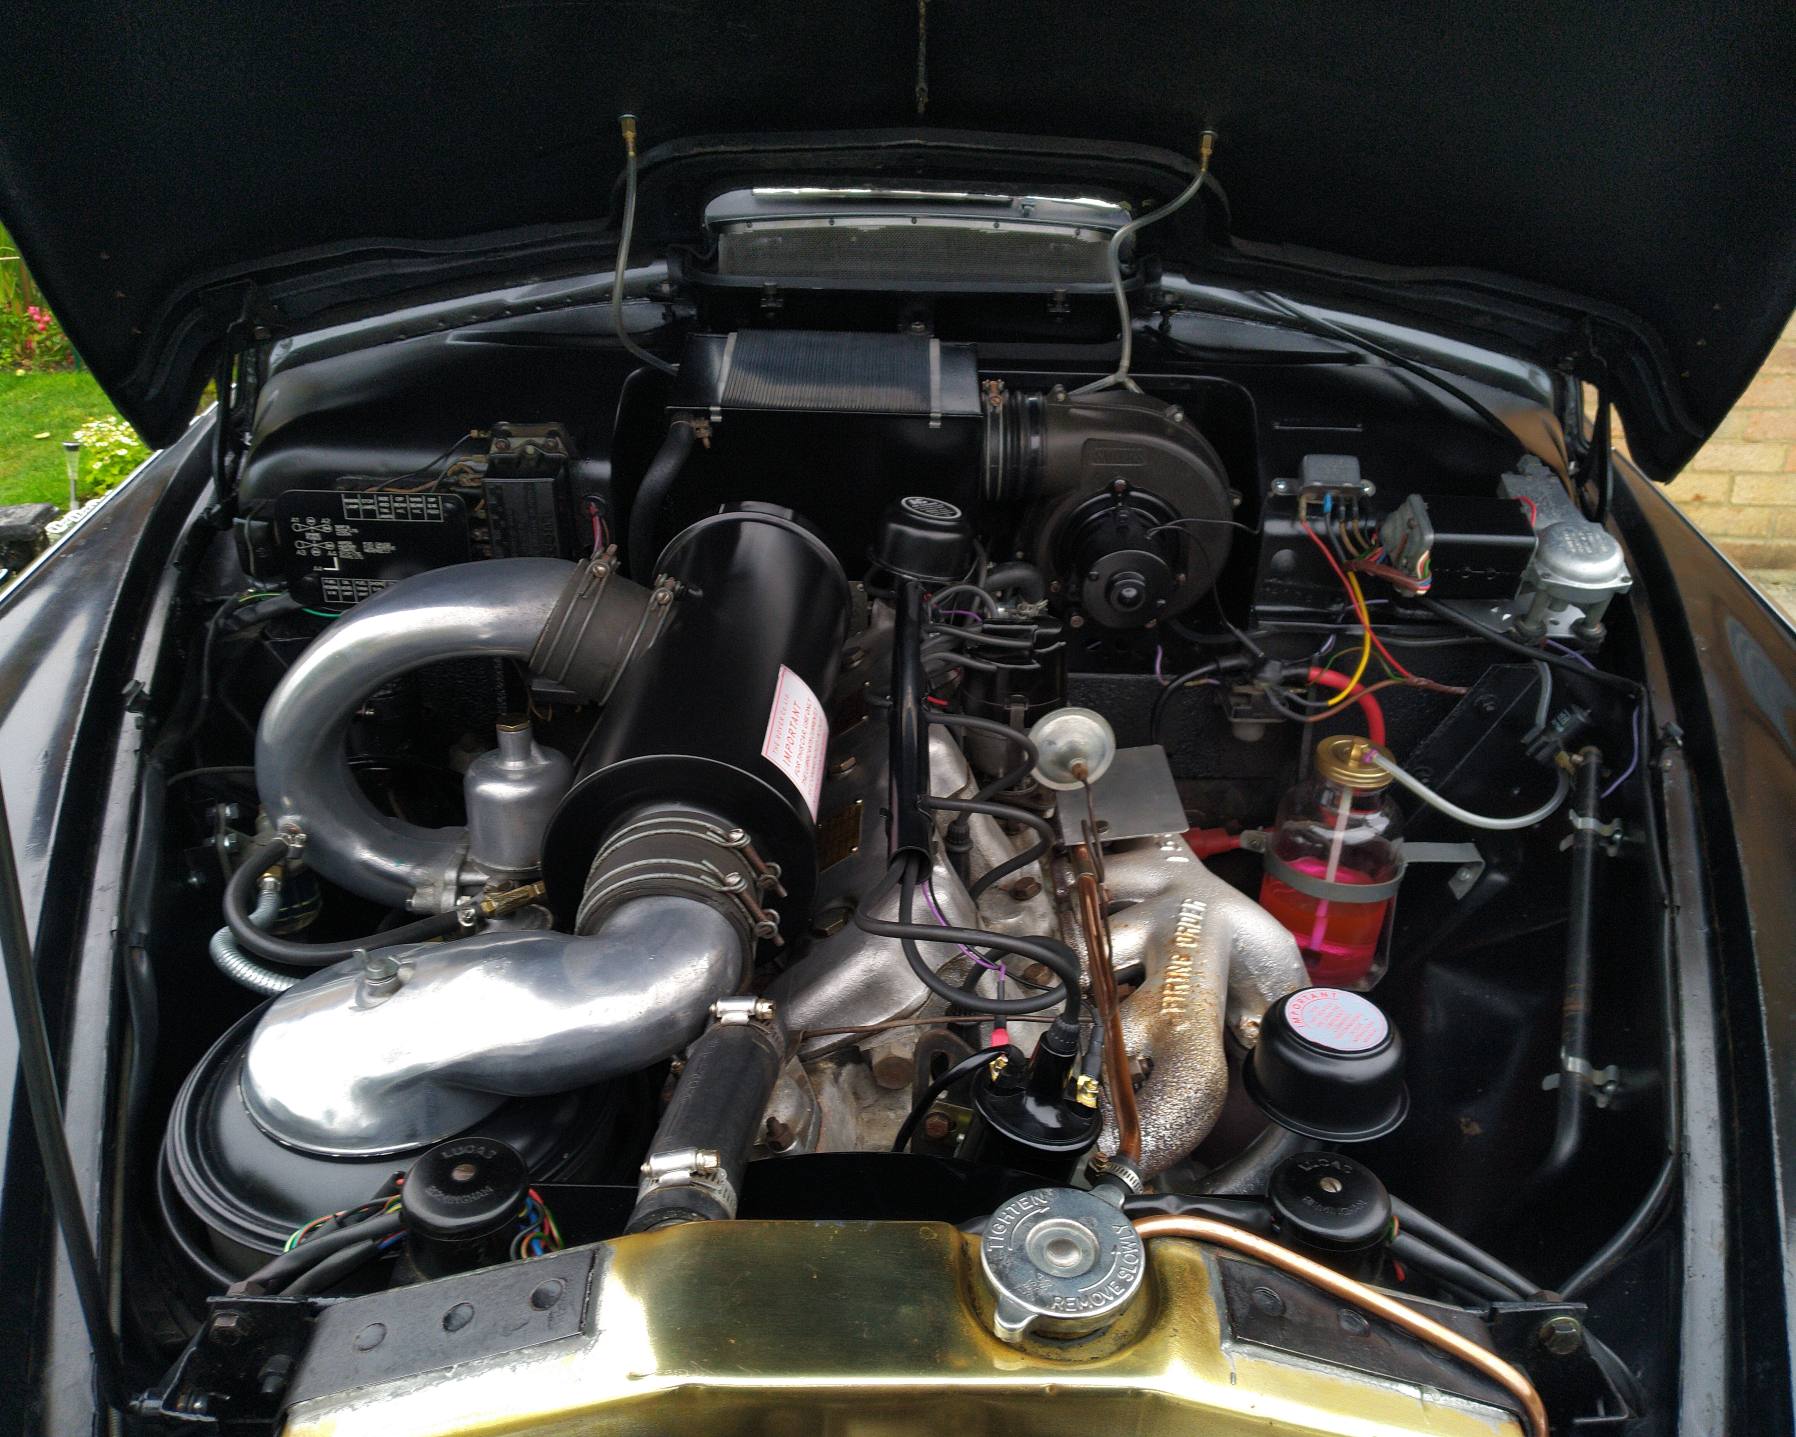 Laurie's engine bay 1